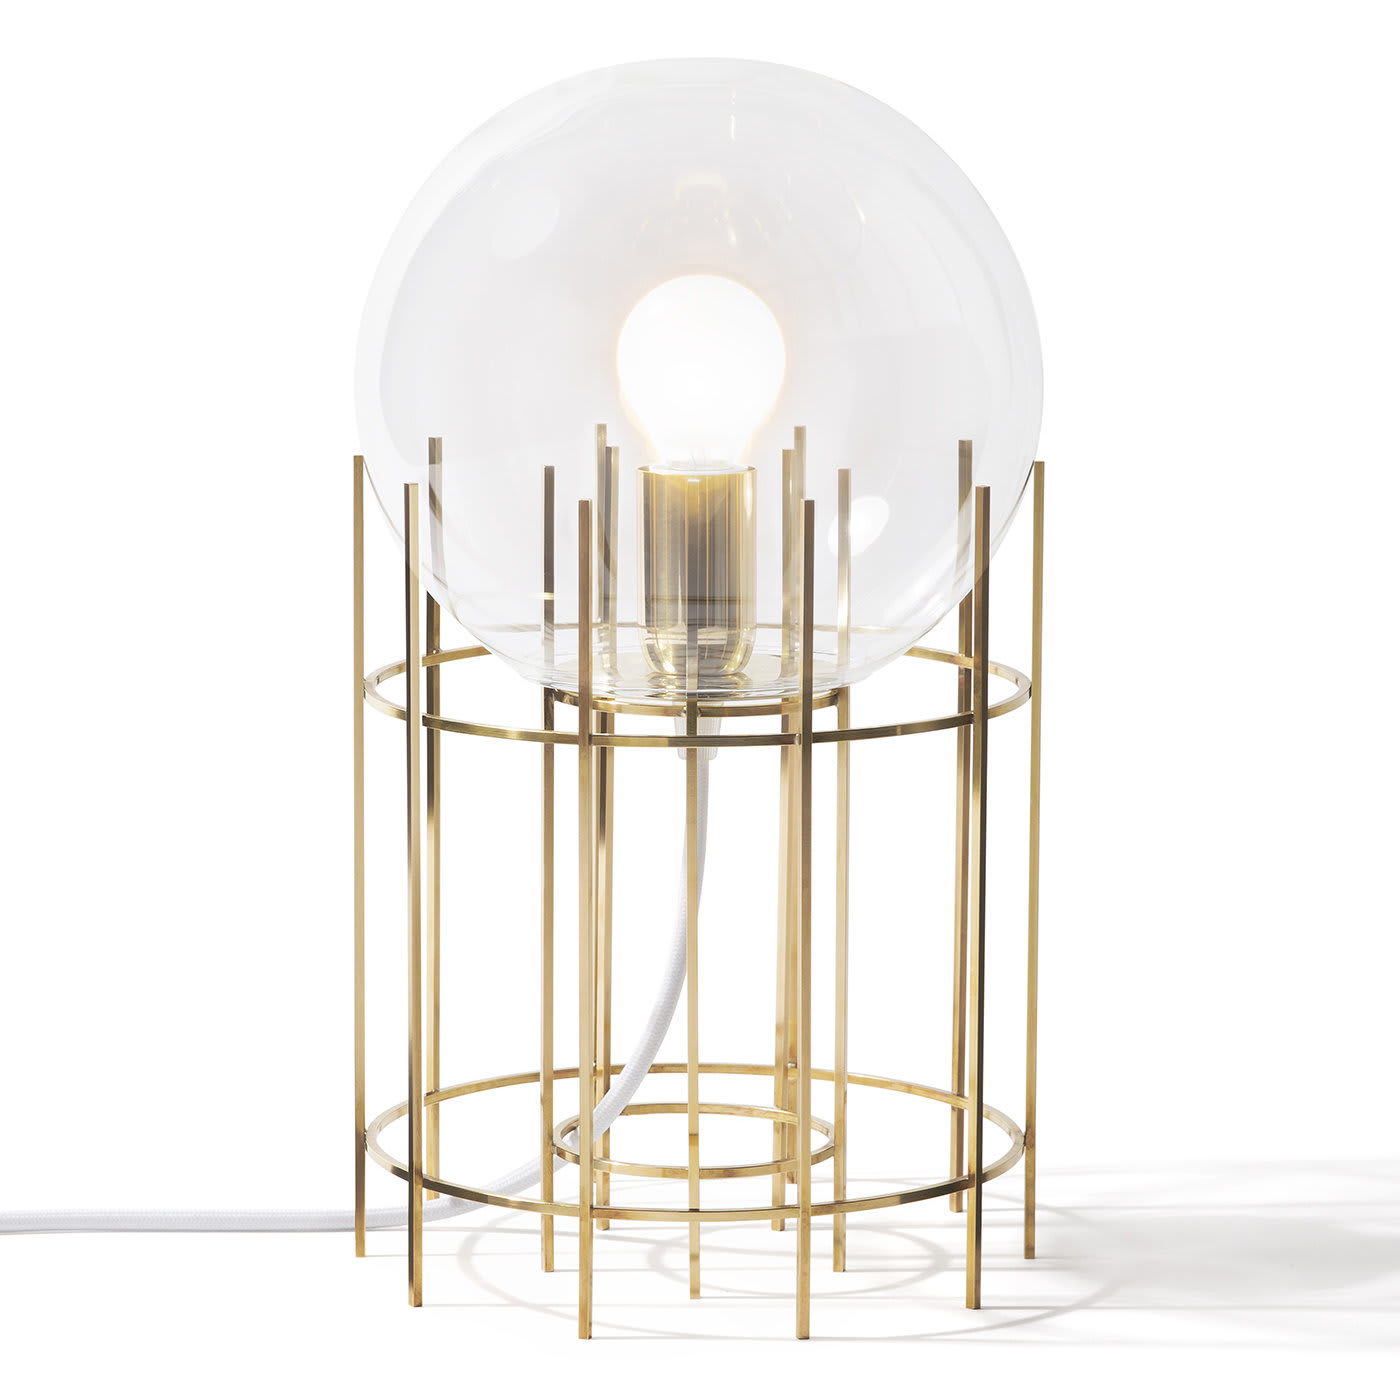 TPLG3 Polished Brass Table Lamp by GoodMorning studio - Daythings